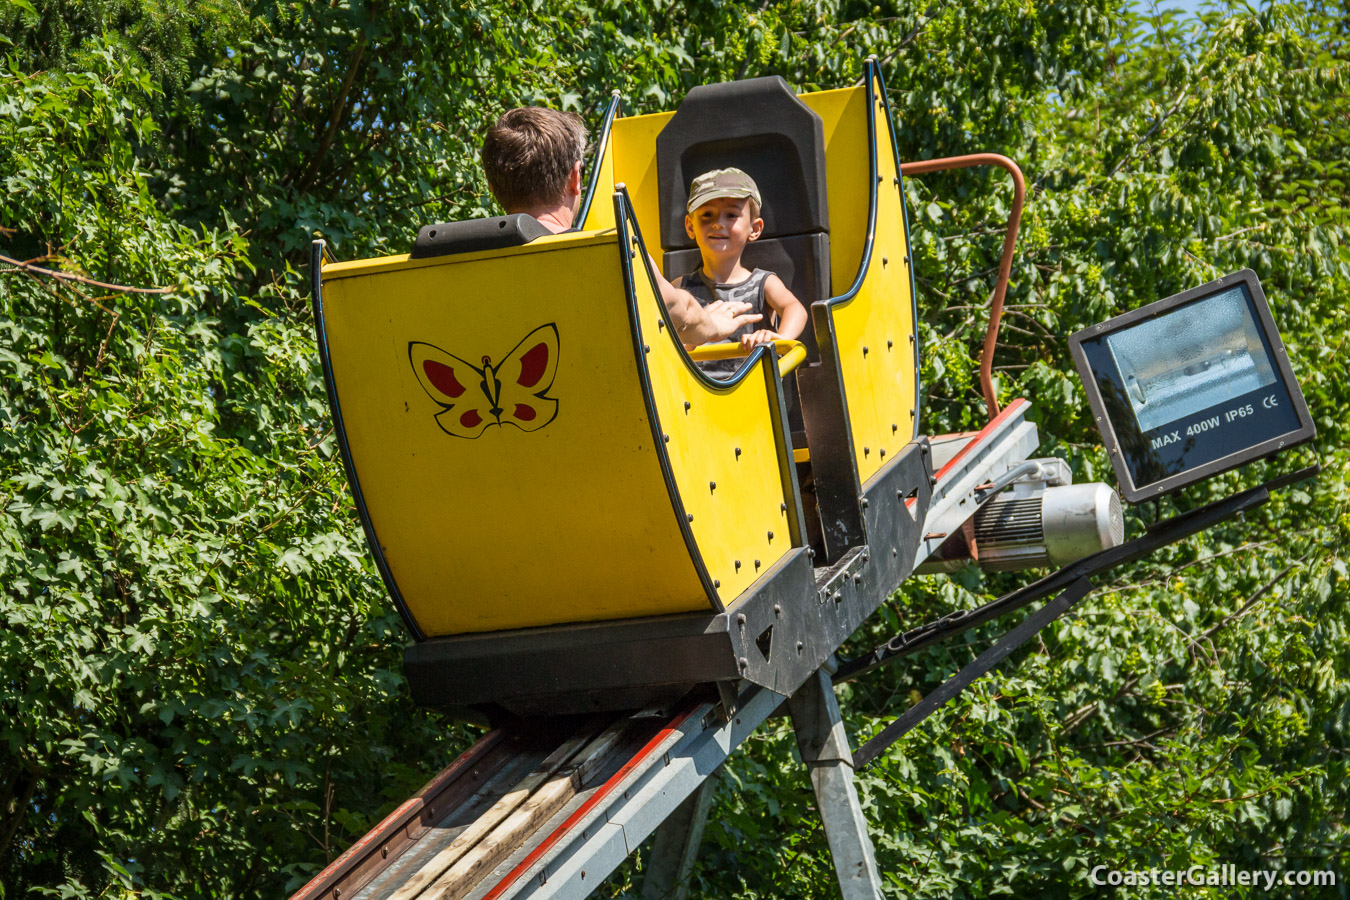 Butterfly roller coaster built by Sunkid Heege GmbH